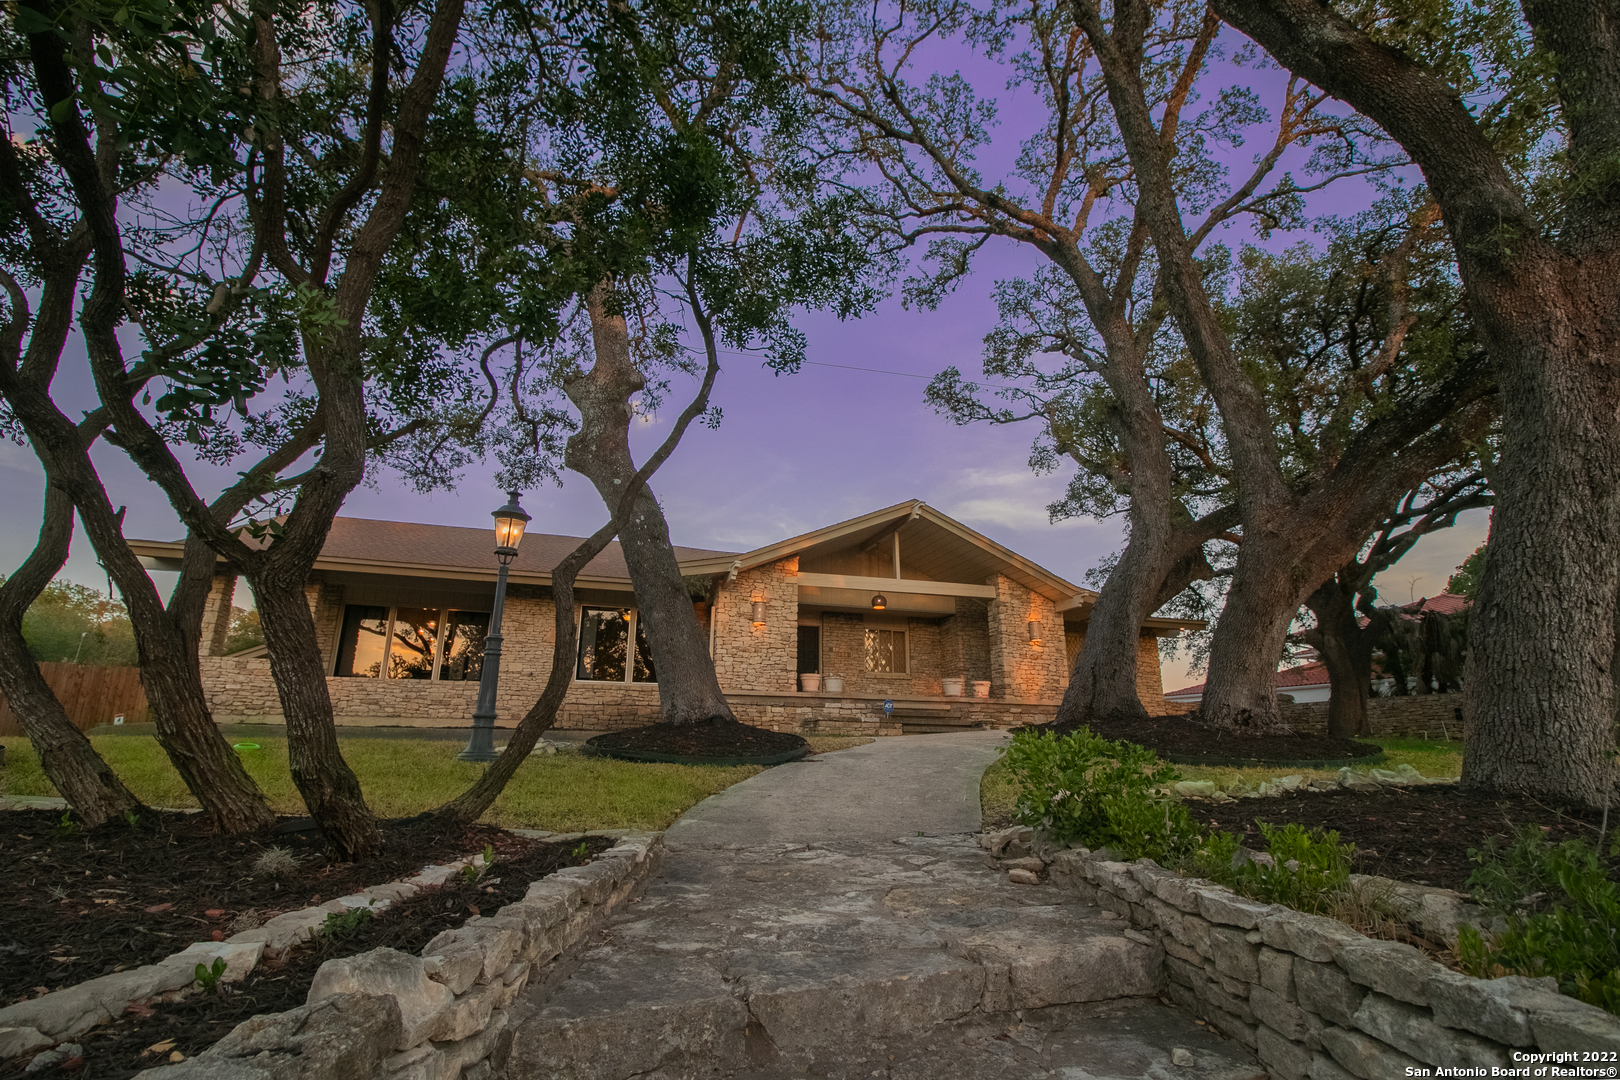 This 1.5 story stone faced home is nestled on .59 acres surrounded by mature trees & stunning views of San Antonio's skyline. This 4 bed 4 bath home, built by W. R. Craig,  has had ENDLESS amounts of recent interior updating: 5 ton A/C (Trane Home App w/two thermostats) (2019), 2 ton A/C (2019), blown-in insulation in roof/ceiling (2019), double pane energy efficient windows w/tilt inwards feature (2019), ceiling fans w/light fixtures & remote controls (2019), One Day Blinds in master w/remote & wall swtich (2019), One Day Blinds in living room & kitchen (2019), electronic entry into home thru garage w/2 remotes (2019), surround sound in living room by patio, kitchen & patio w/Onkyo app (2019), security cameras w/Night Owl app & tv monitor (2019).  Welcome through the wood double door front doors into the spacious front entry. You are meet with the front living and dining room. The family room features a stone gas fire place, attractive wooden beams & opens to the kitchen. The kitchen updates include stainless steel appliances: built-in oven (2019), gas range (2019), dishwasher (2019), built-in microwave (2019), pot filler (2022), disposal (2022). The kitchen also features granite countertops, attractive backsplash, island & breakfast bar. The spacious master retreat features a large window w/picturesque views of downtown & the pool, large walk- in closet, built in cabinetry, large vanity & walk-in shower. Great sized secondary bedrooms! The backyard is an entertainer's dream: stunning pool, HUGE covered patio w/fans, breathtaking trees surrounding the backyard. Very large driveway, plenty of room for rvs or multiple cars. Separate structure perfect for a guest house or workshop! The exterior features electronic privacy gate to driveway (2019), keypad at gate (2019), outdoor lighting along tree/fence, front & backyard, along pool & streetside (2019), 4 solar lights (2019) & blacktop driveway (2019). Large laundry room w/tons of cabinetry & two sided sink. Wonderful opportunity! Homes in this neighborhood don't come up for sale often!